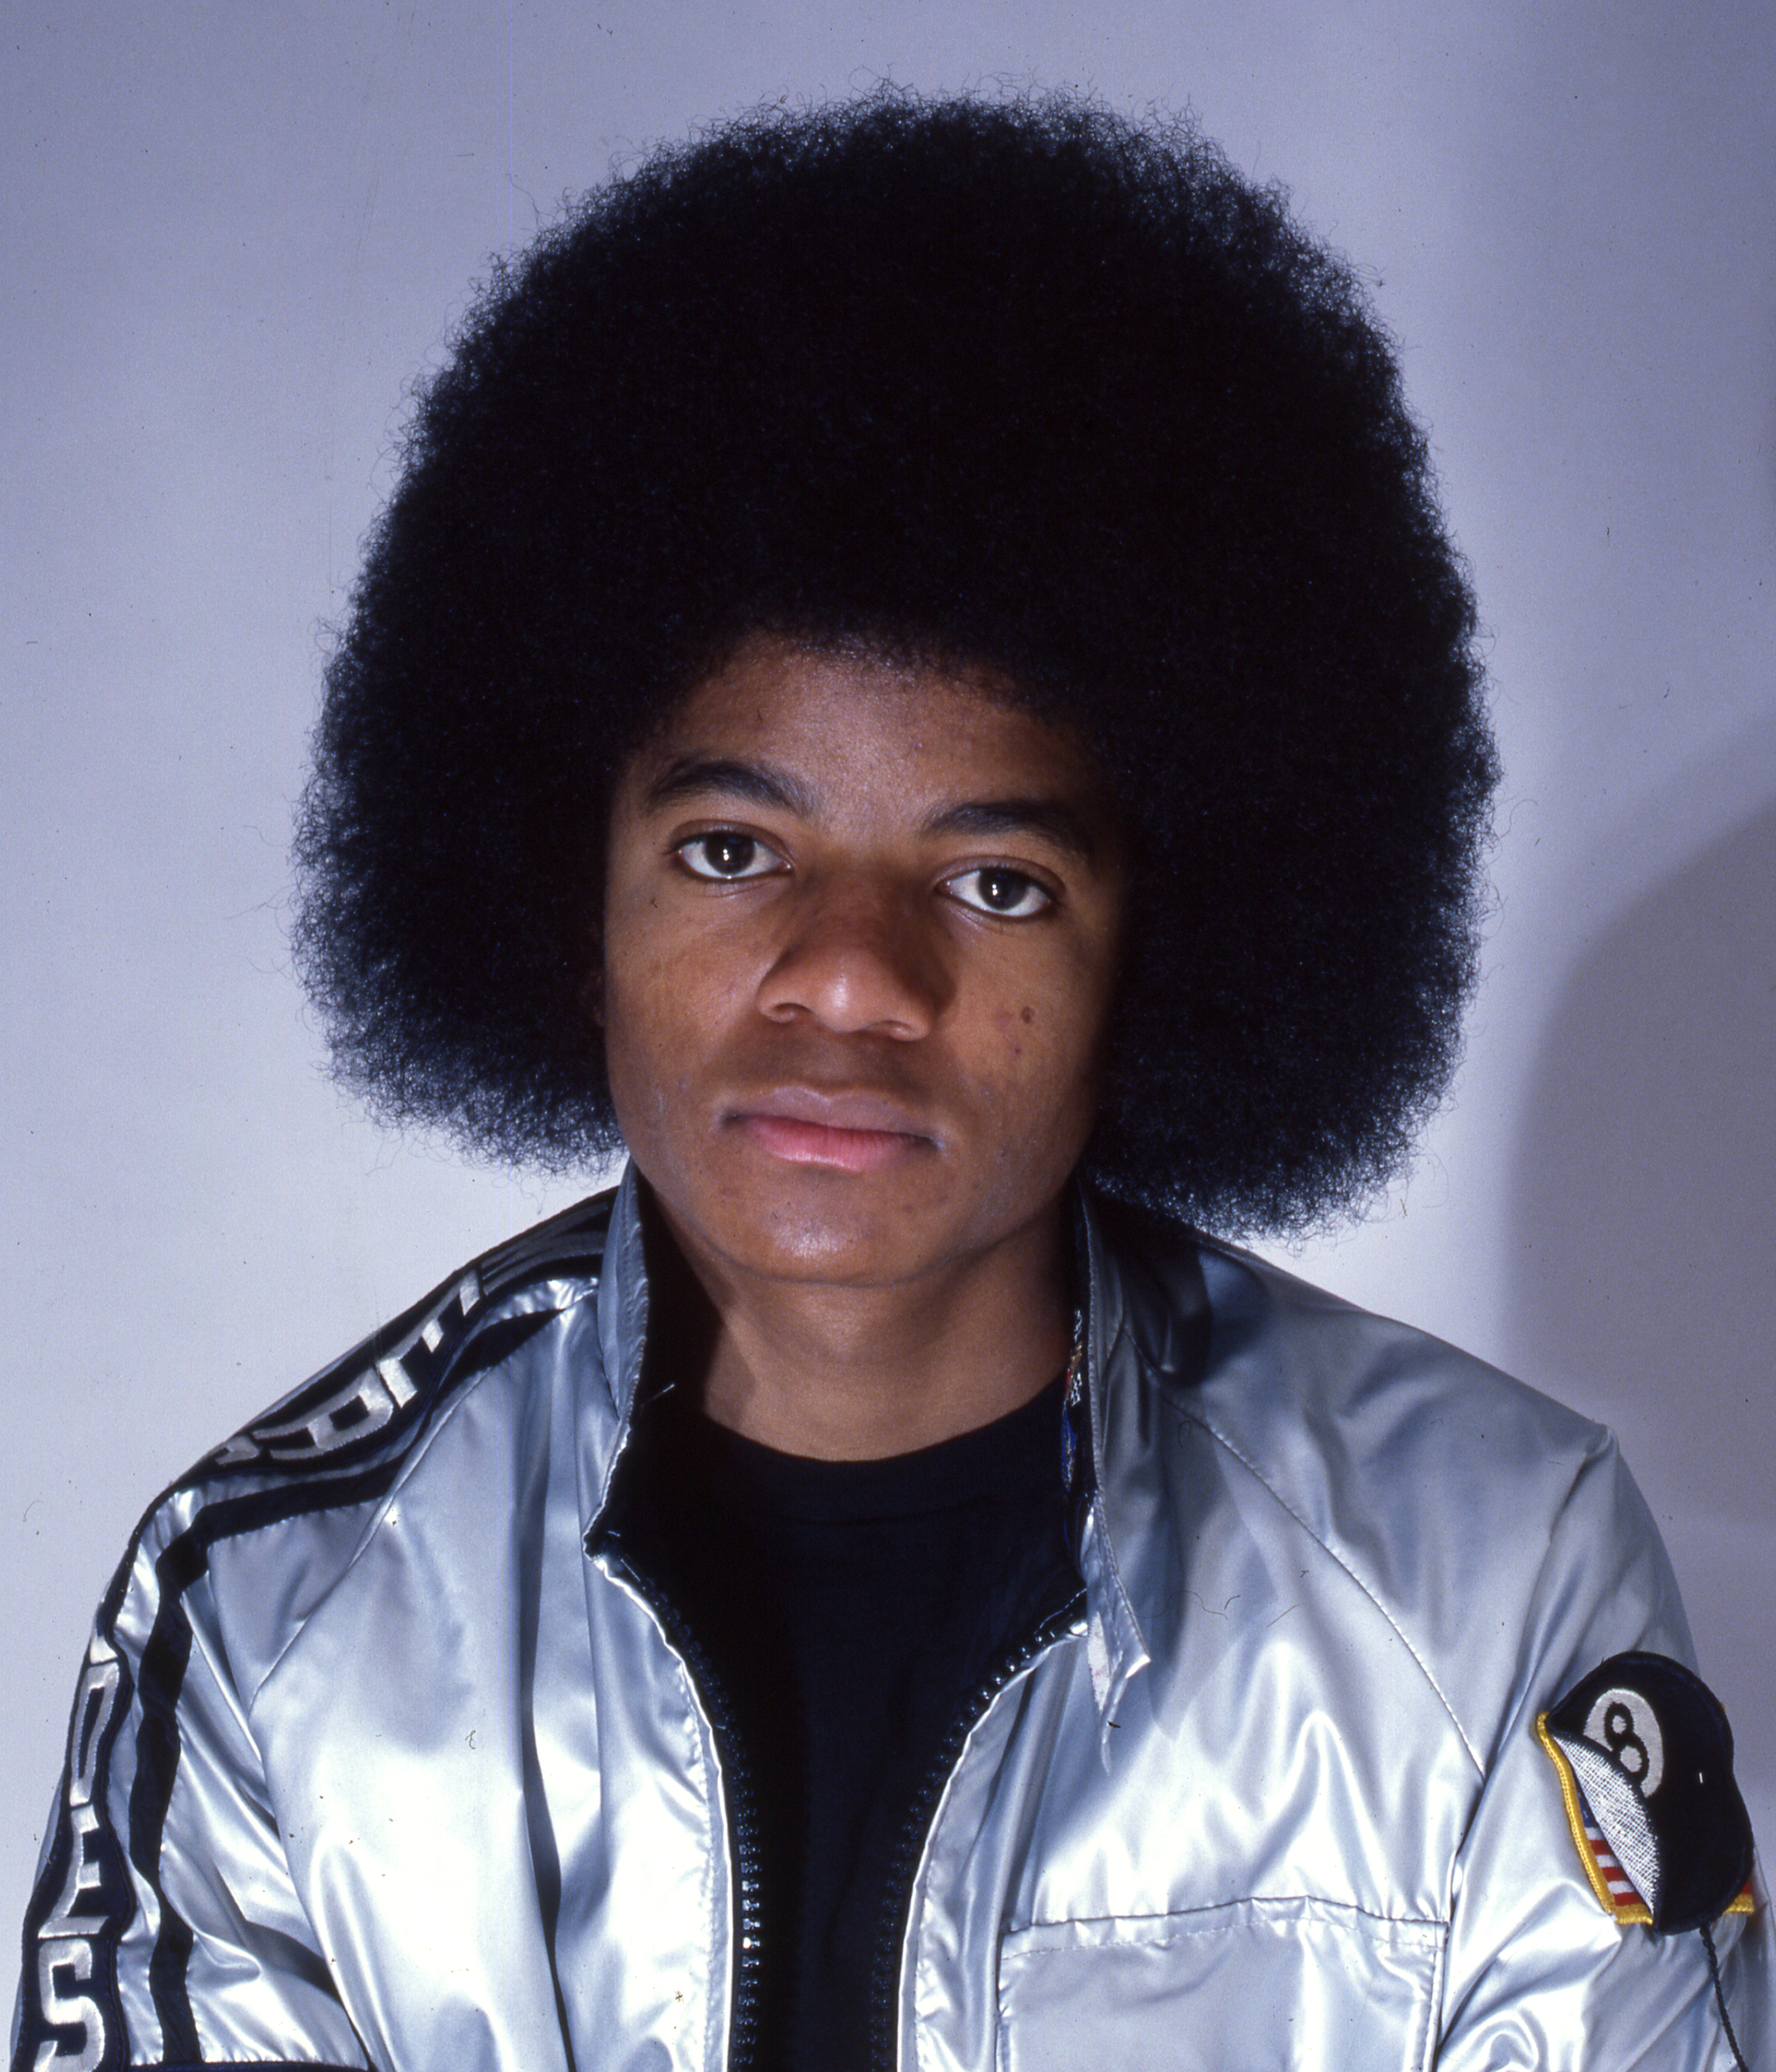 Michael Jackson photographed in 1977 | Source: Getty Images